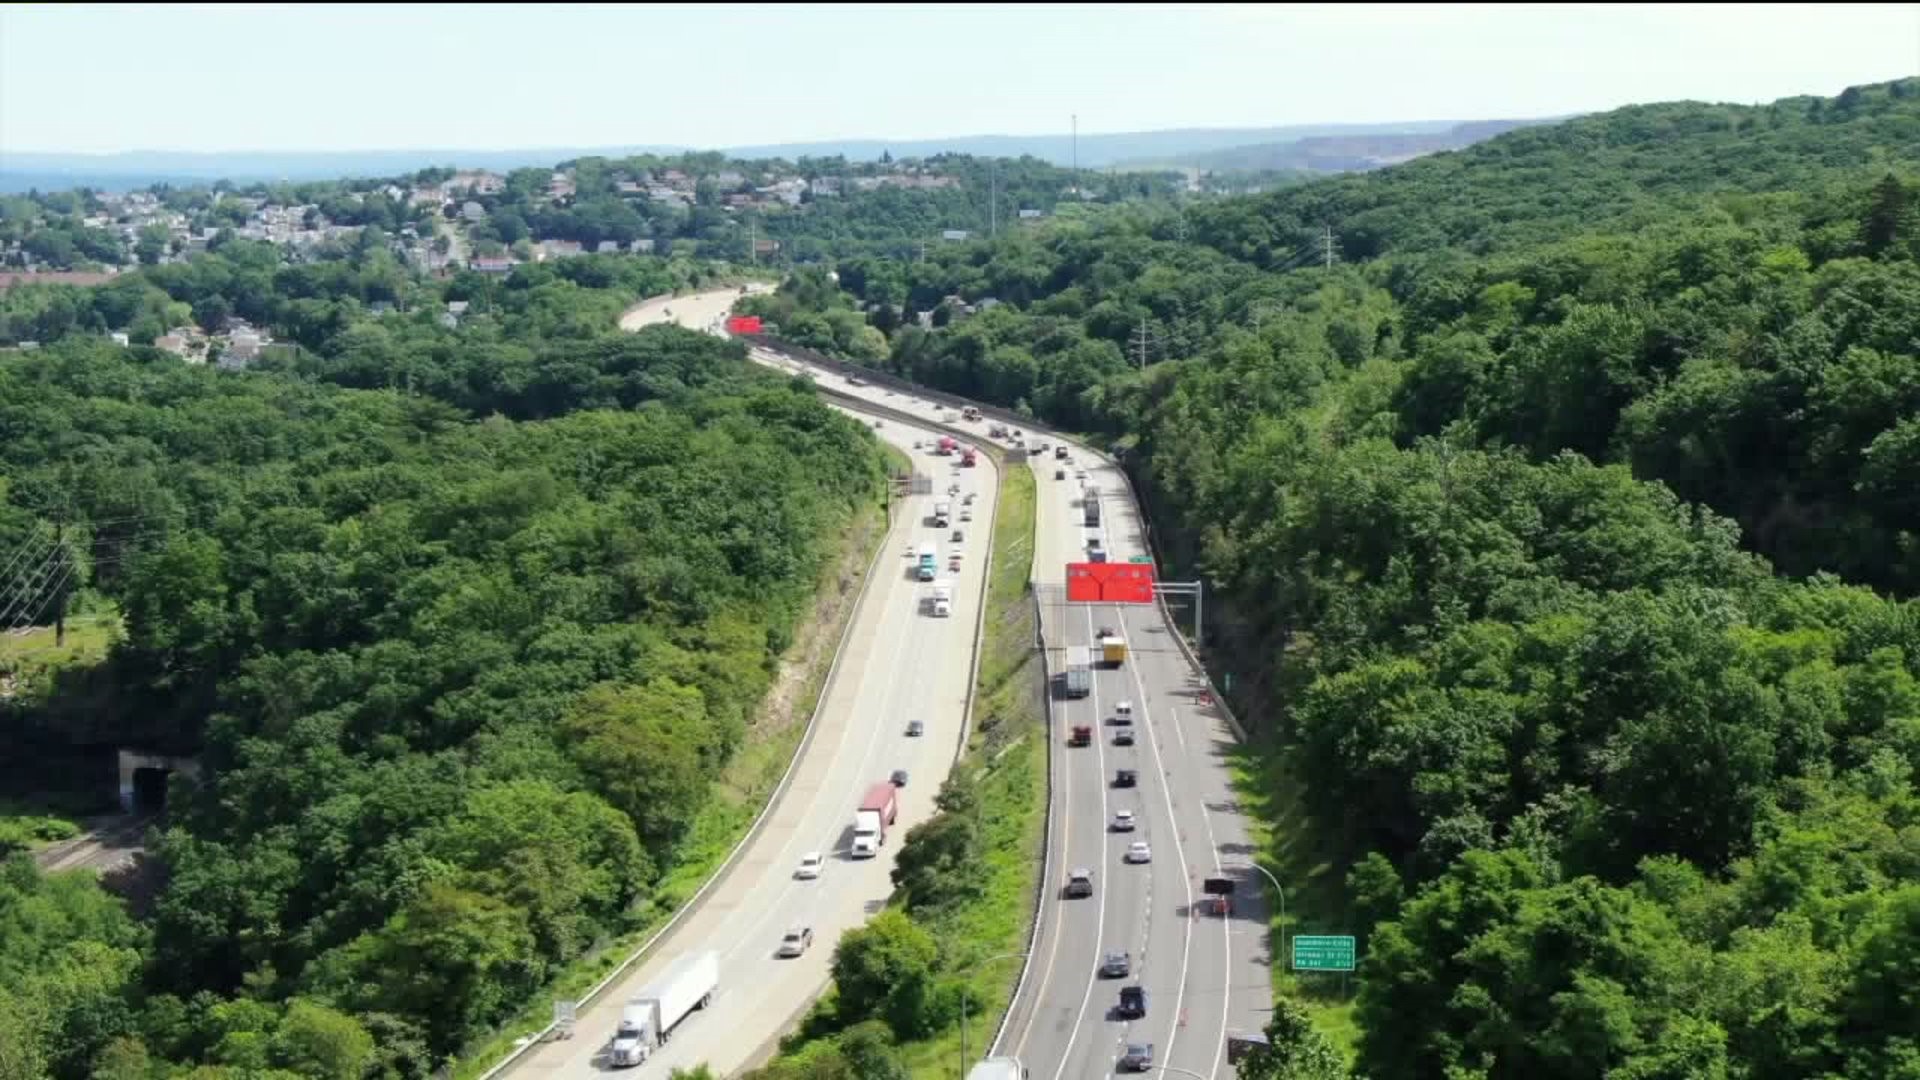 Confusion and Congestion on I-81